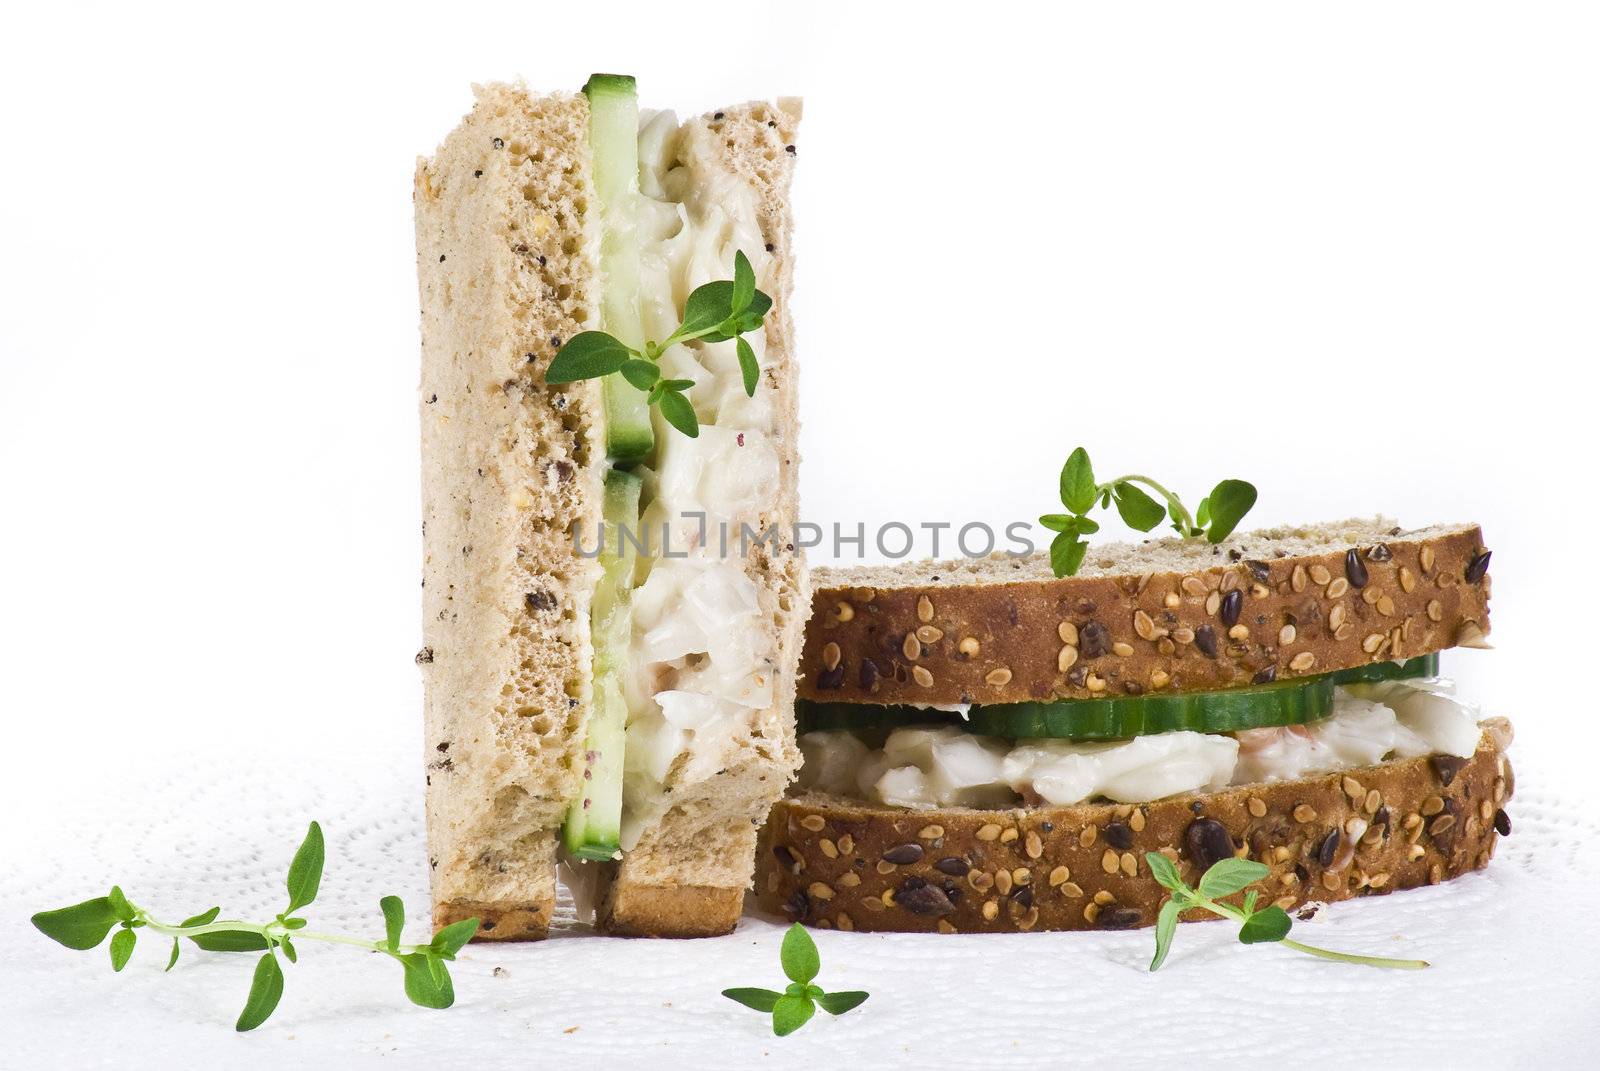 Cucumber and coleslaw sandwich by caldix